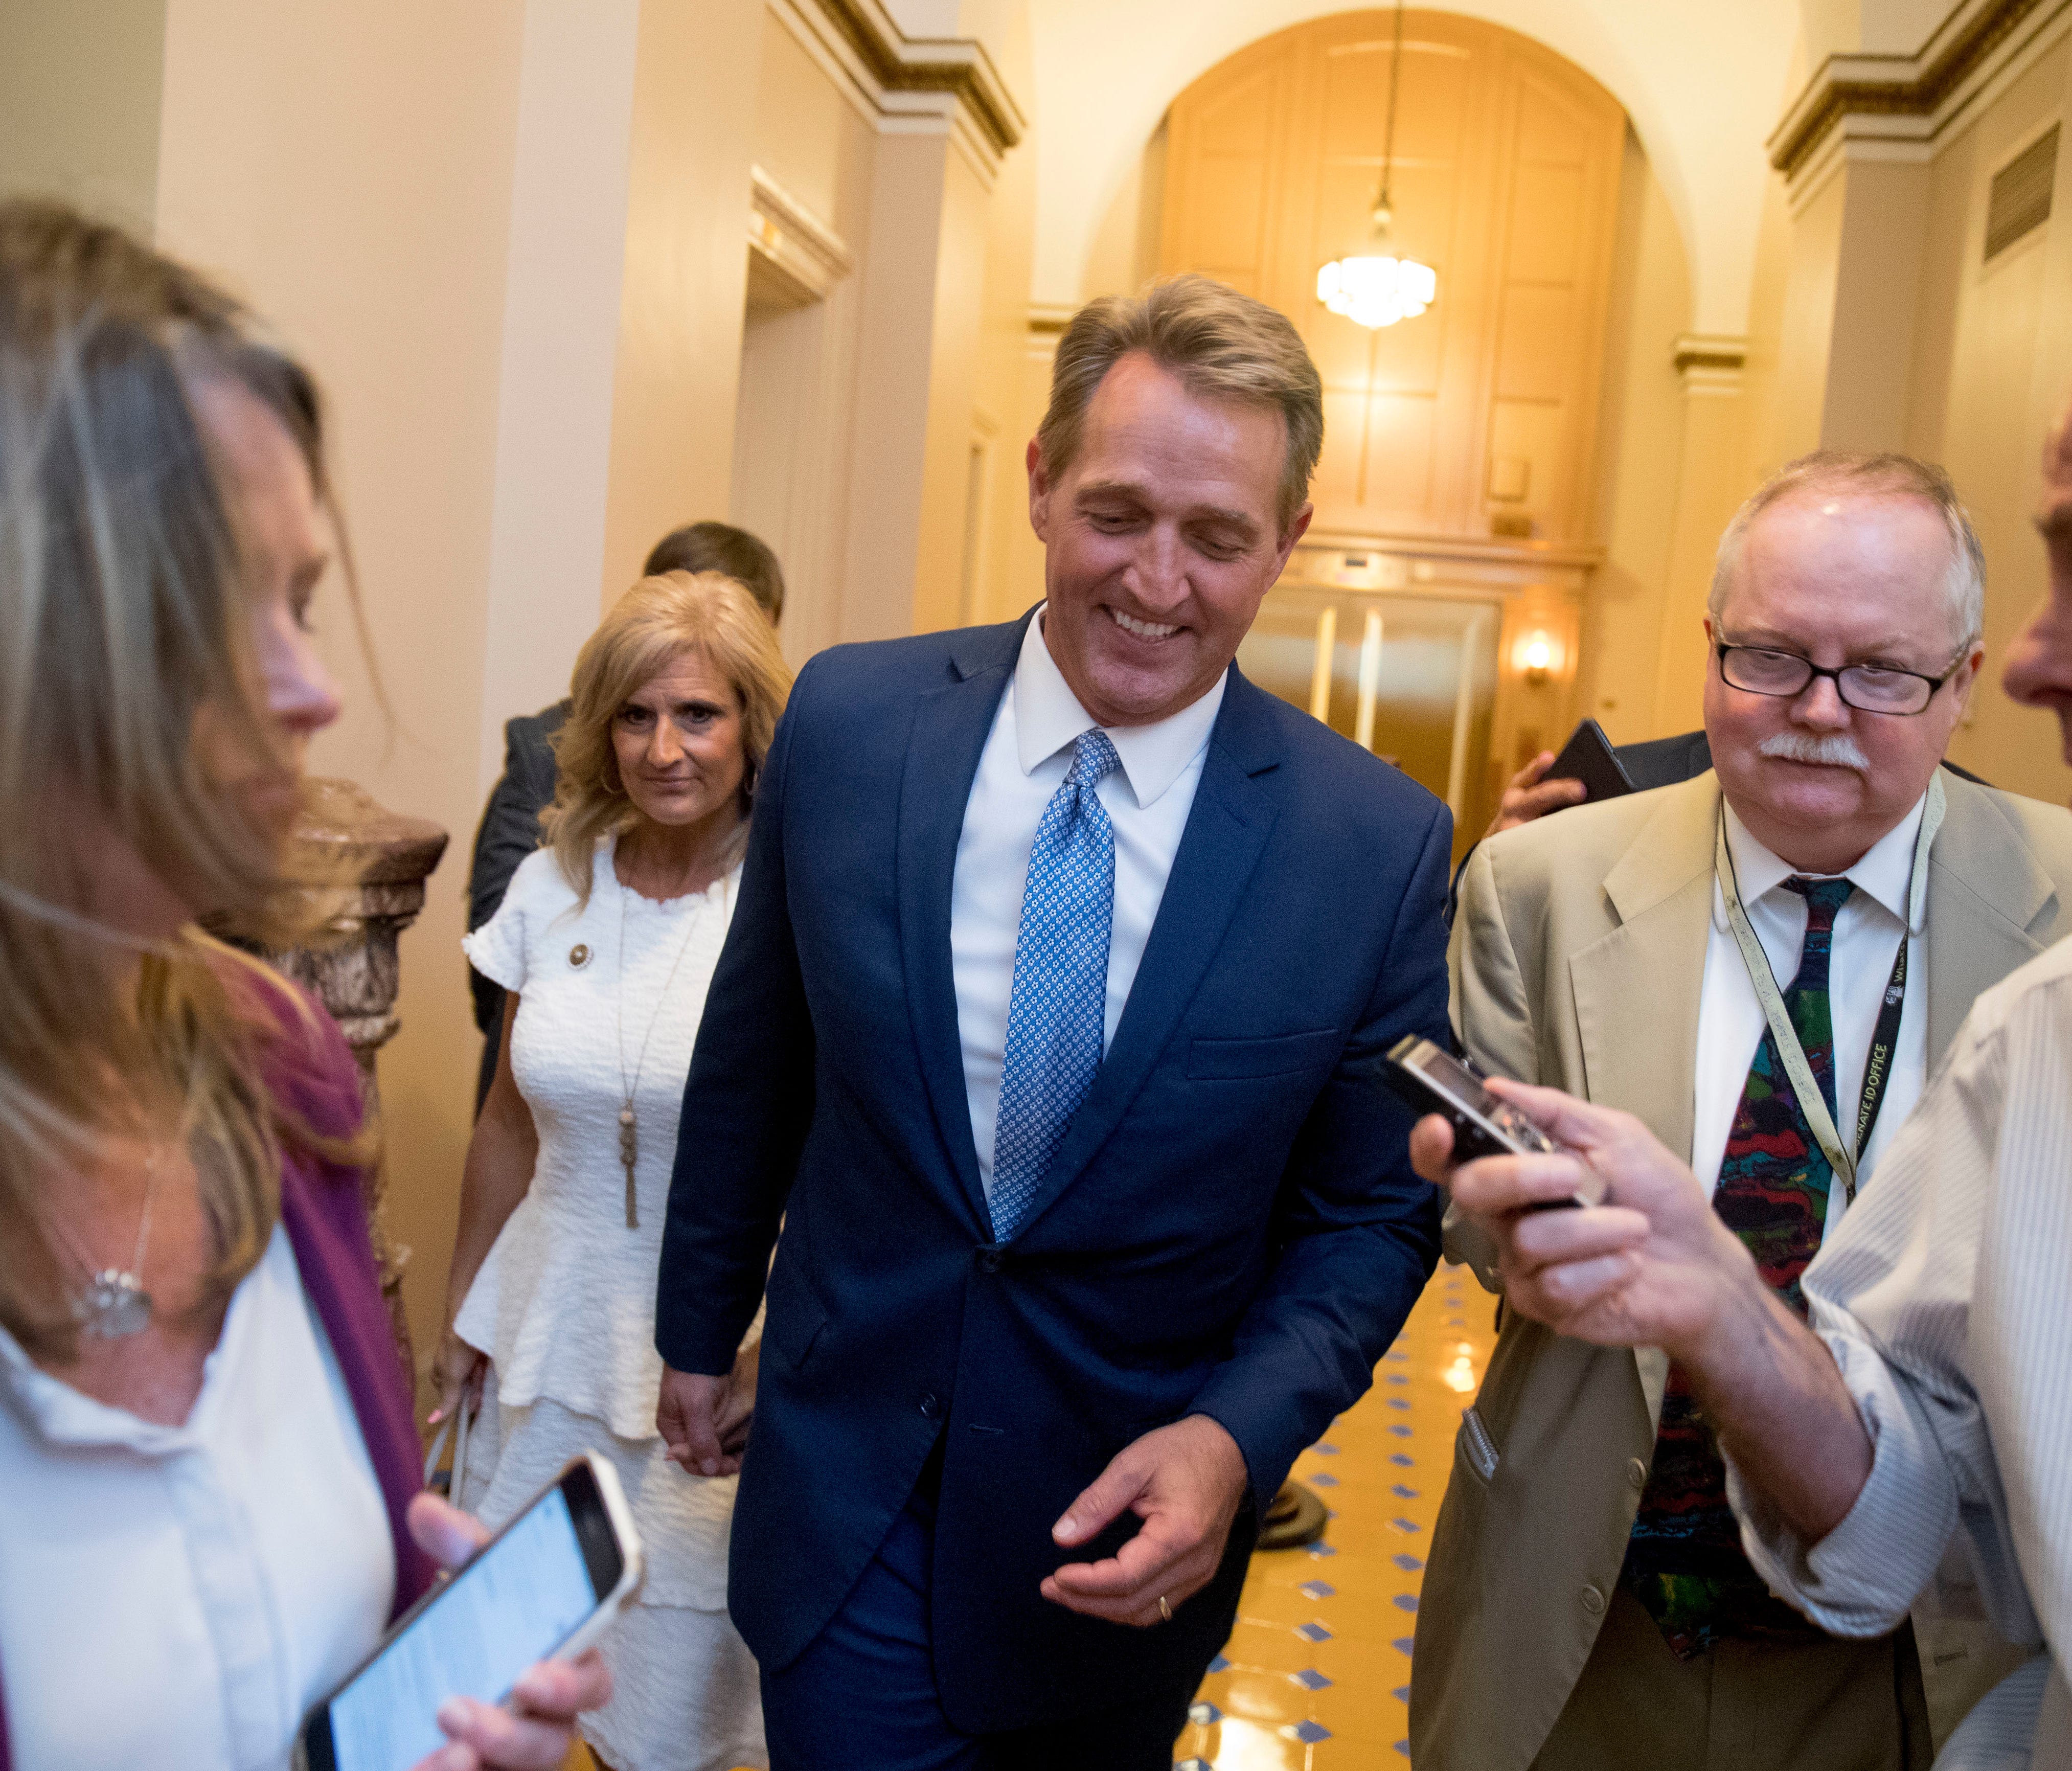 Sen. Jeff Flake, R-Ariz., accompanied by his wife, Cheryl, leaves the Capitol on Oct. 24, 2017, after announcing he won't seek re-election in 2018.